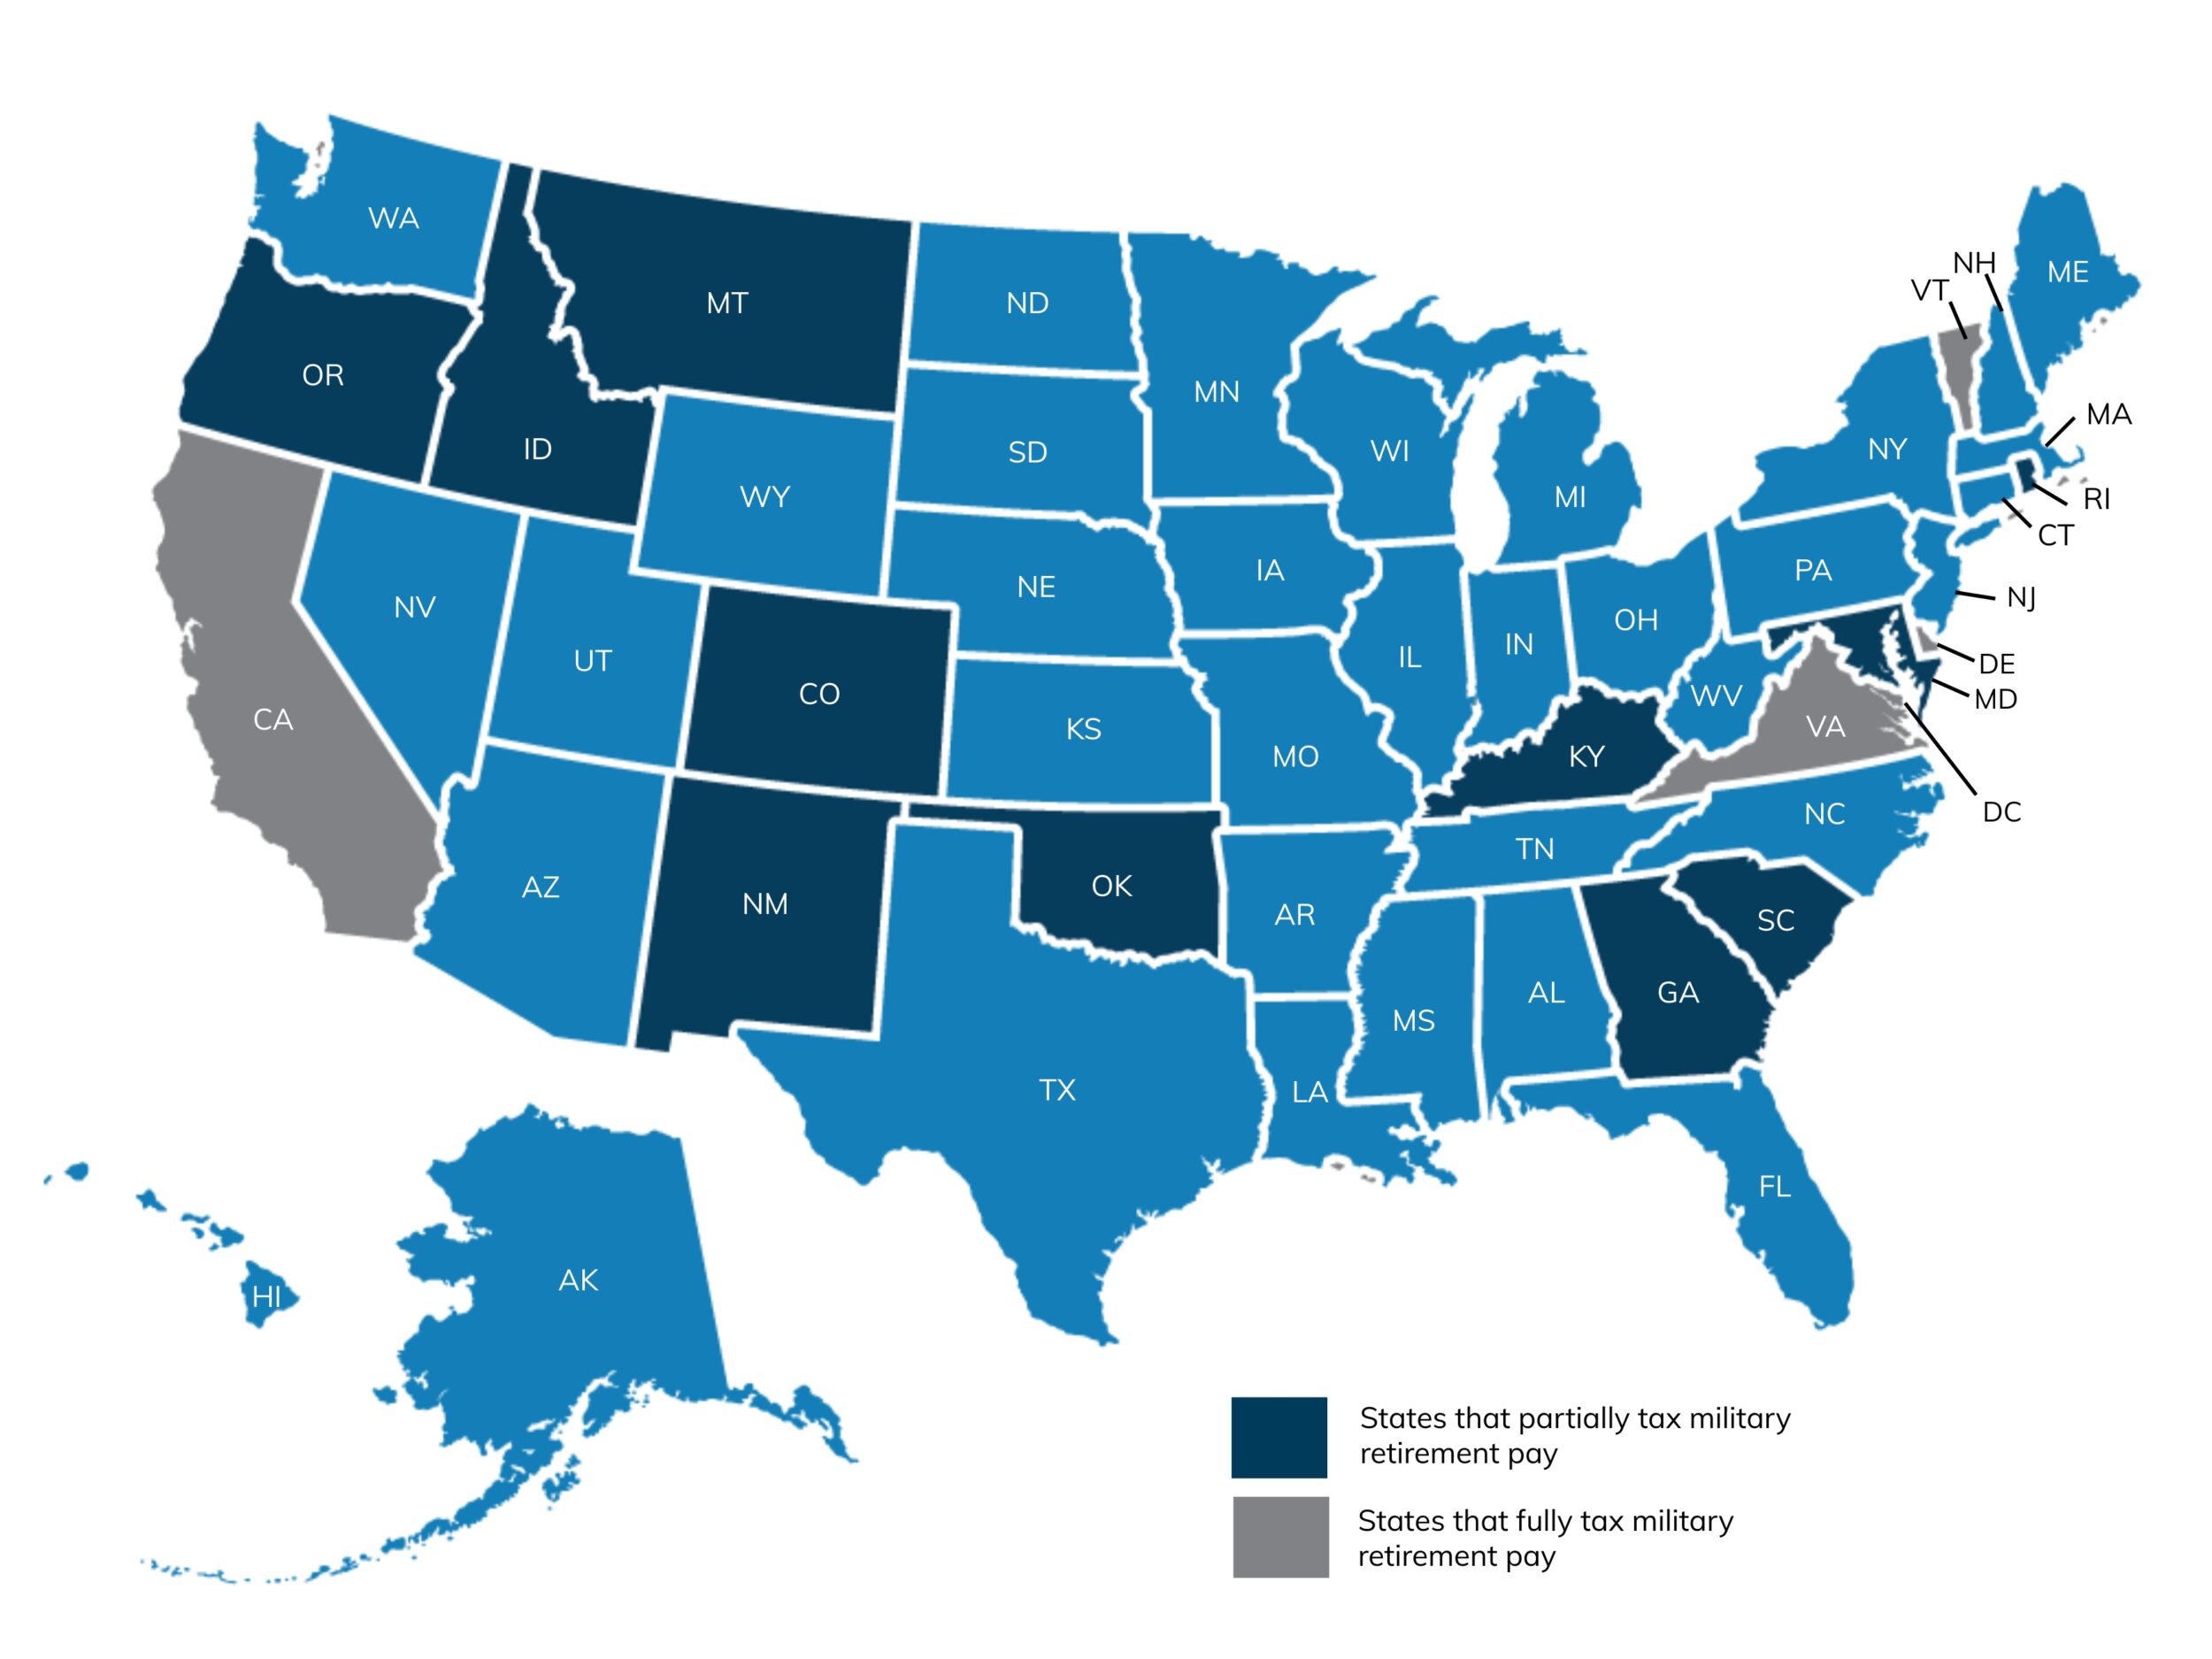 states that tax military retirement benefits